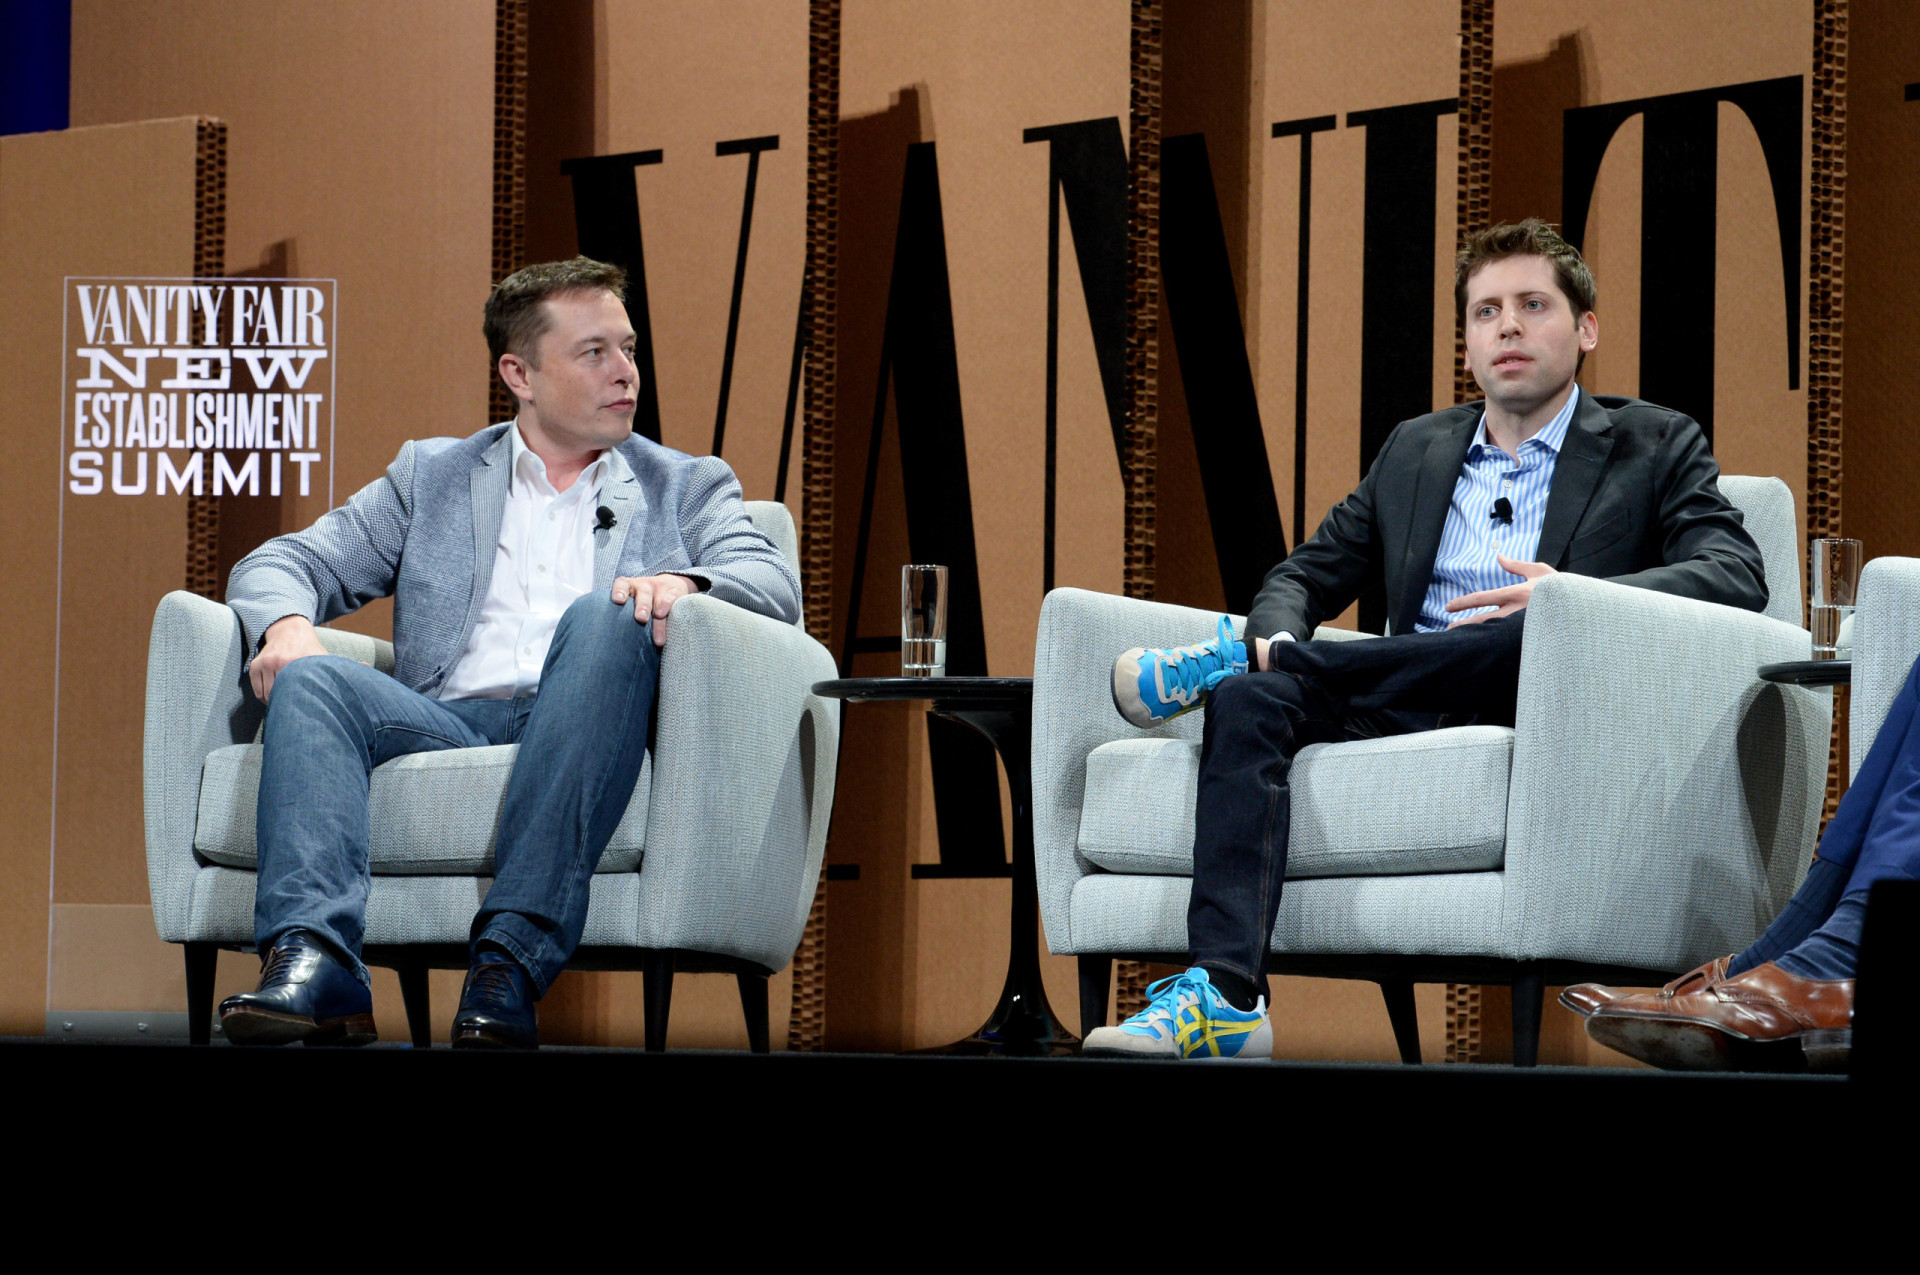 <p>The artificial intelligence research non-profit company behind ChatGPT, OpenAI, was founded in 2015 by Elon Musk, Sam Altman (right), and other Silicon Valley investors. Due to a conflict of interest between OpenAI and the autonomous driving research done with Tesla, Musk stepped down from the board in 2018, but remains an investor, and one who was excited for the launch.</p><p><a href="https://www.msn.com/en-us/community/channel/vid-7xx8mnucu55yw63we9va2gwr7uihbxwc68fxqp25x6tg4ftibpra?cvid=94631541bc0f4f89bfd59158d696ad7e">Follow us and access great exclusive content every day</a></p>